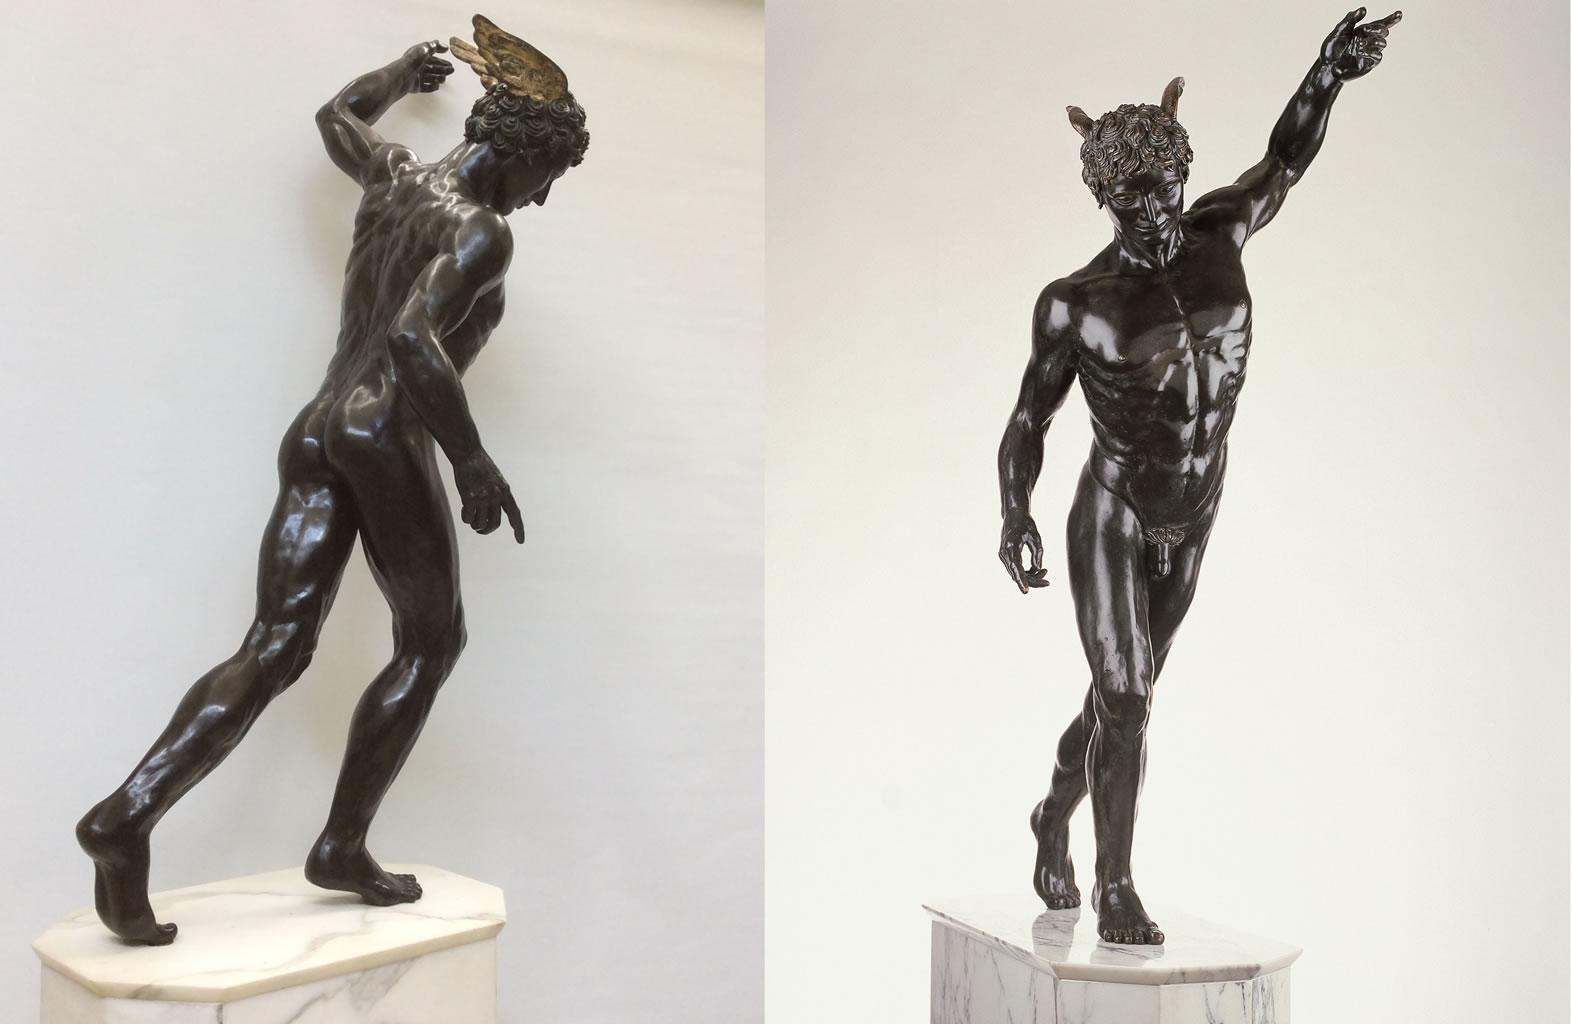 Mercurius Bronze Sculpture Contemporary Classic Mythology

The sculptures of Margot Homan (1956, Oss, the Netherlands) show a perfect command of the old craft of modelling and sculpting, with which she continually develops an age old tradition. In